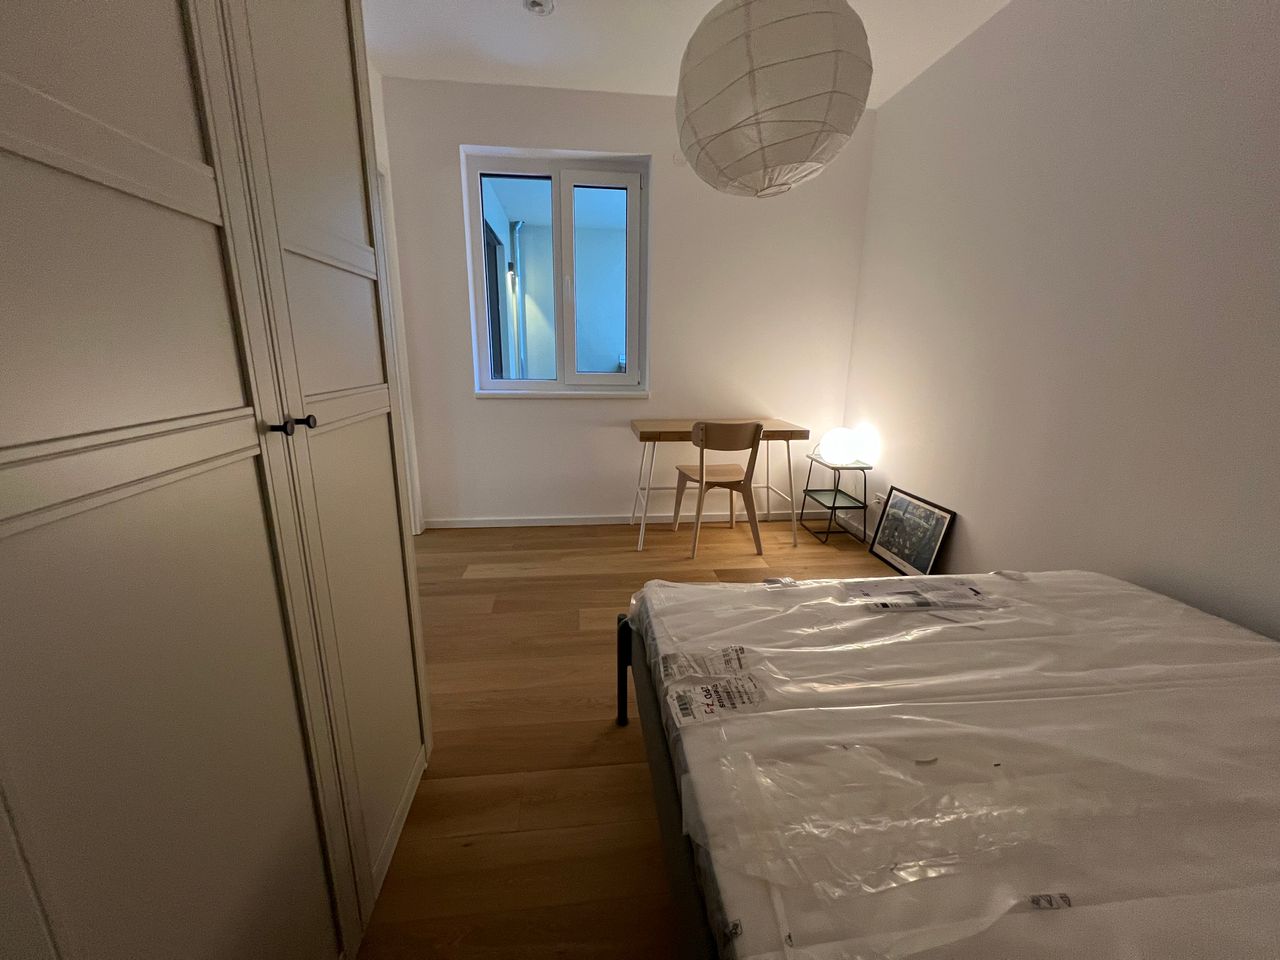 NEW BUILD, first occupancy, furnished 2-room apartment in TOP location with balcony in Berlin, KfW 55